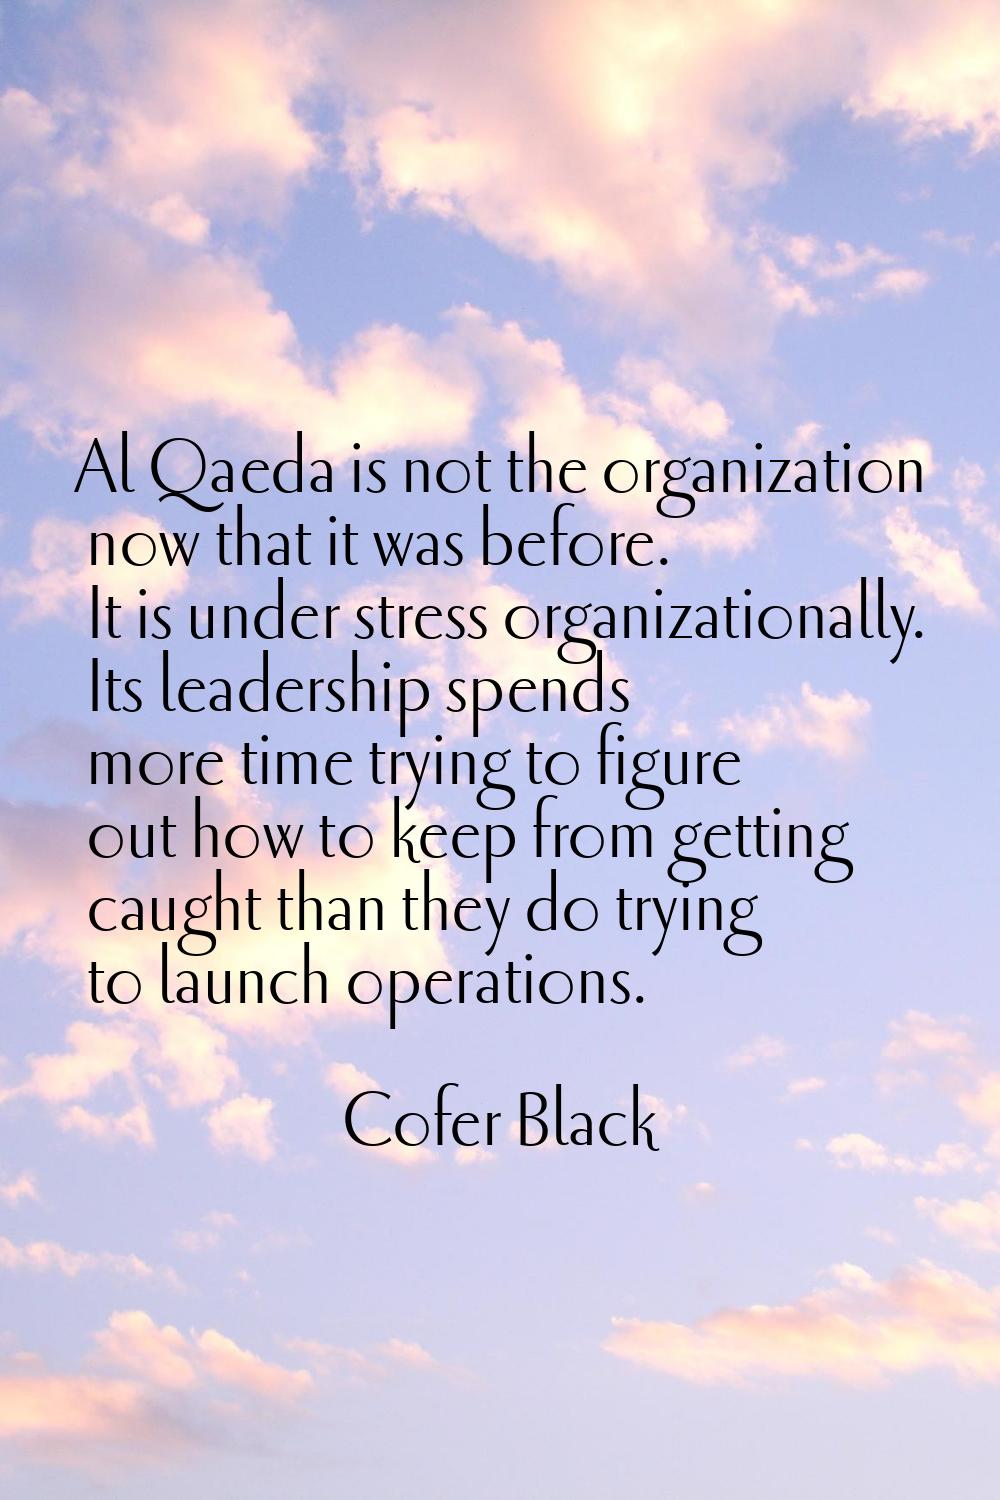 Al Qaeda is not the organization now that it was before. It is under stress organizationally. Its l